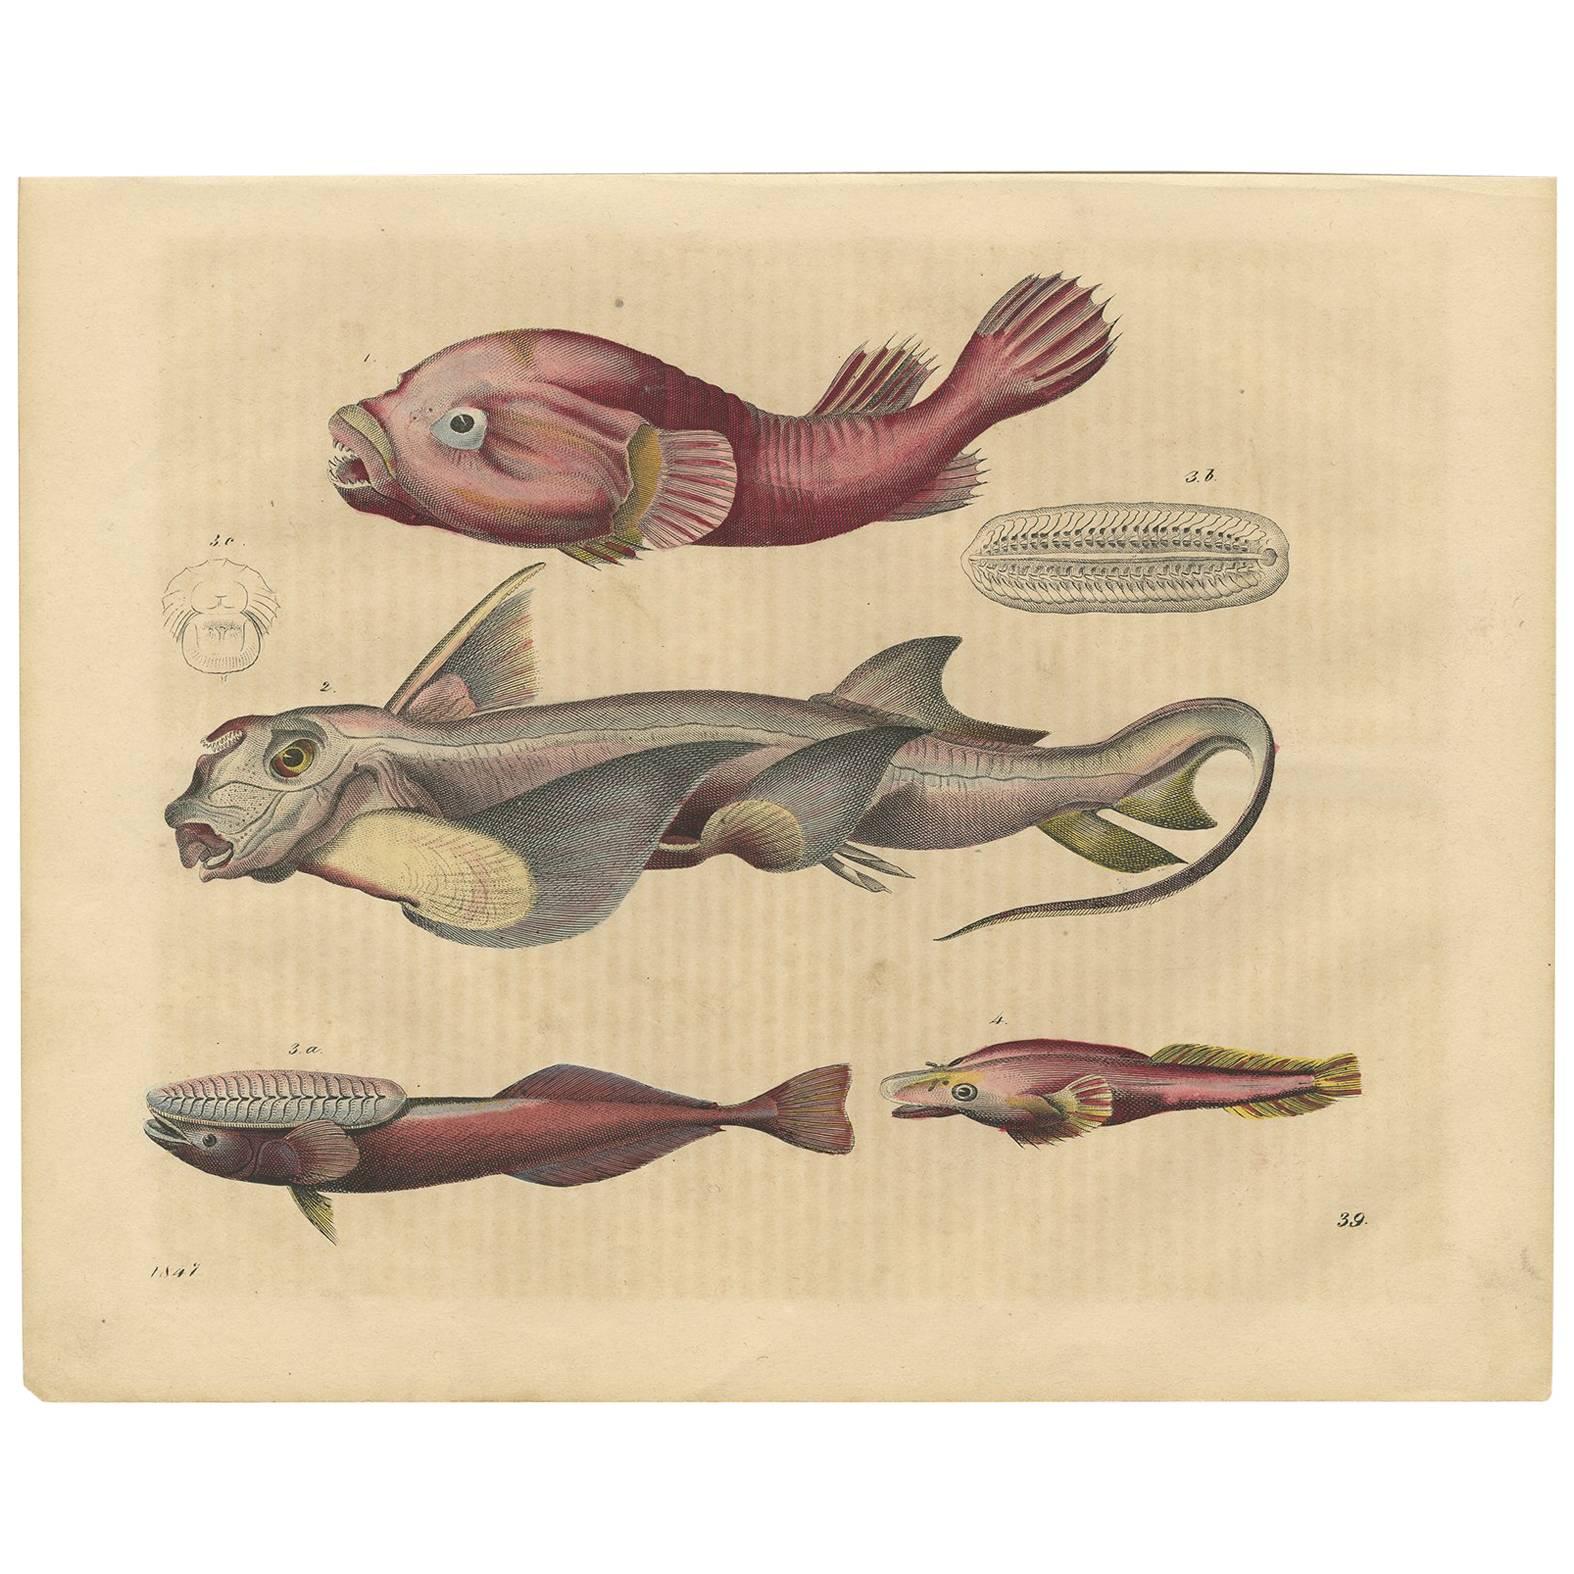 Antique Animal Print of Clingfishes by C. Hoffmann, 1847 For Sale